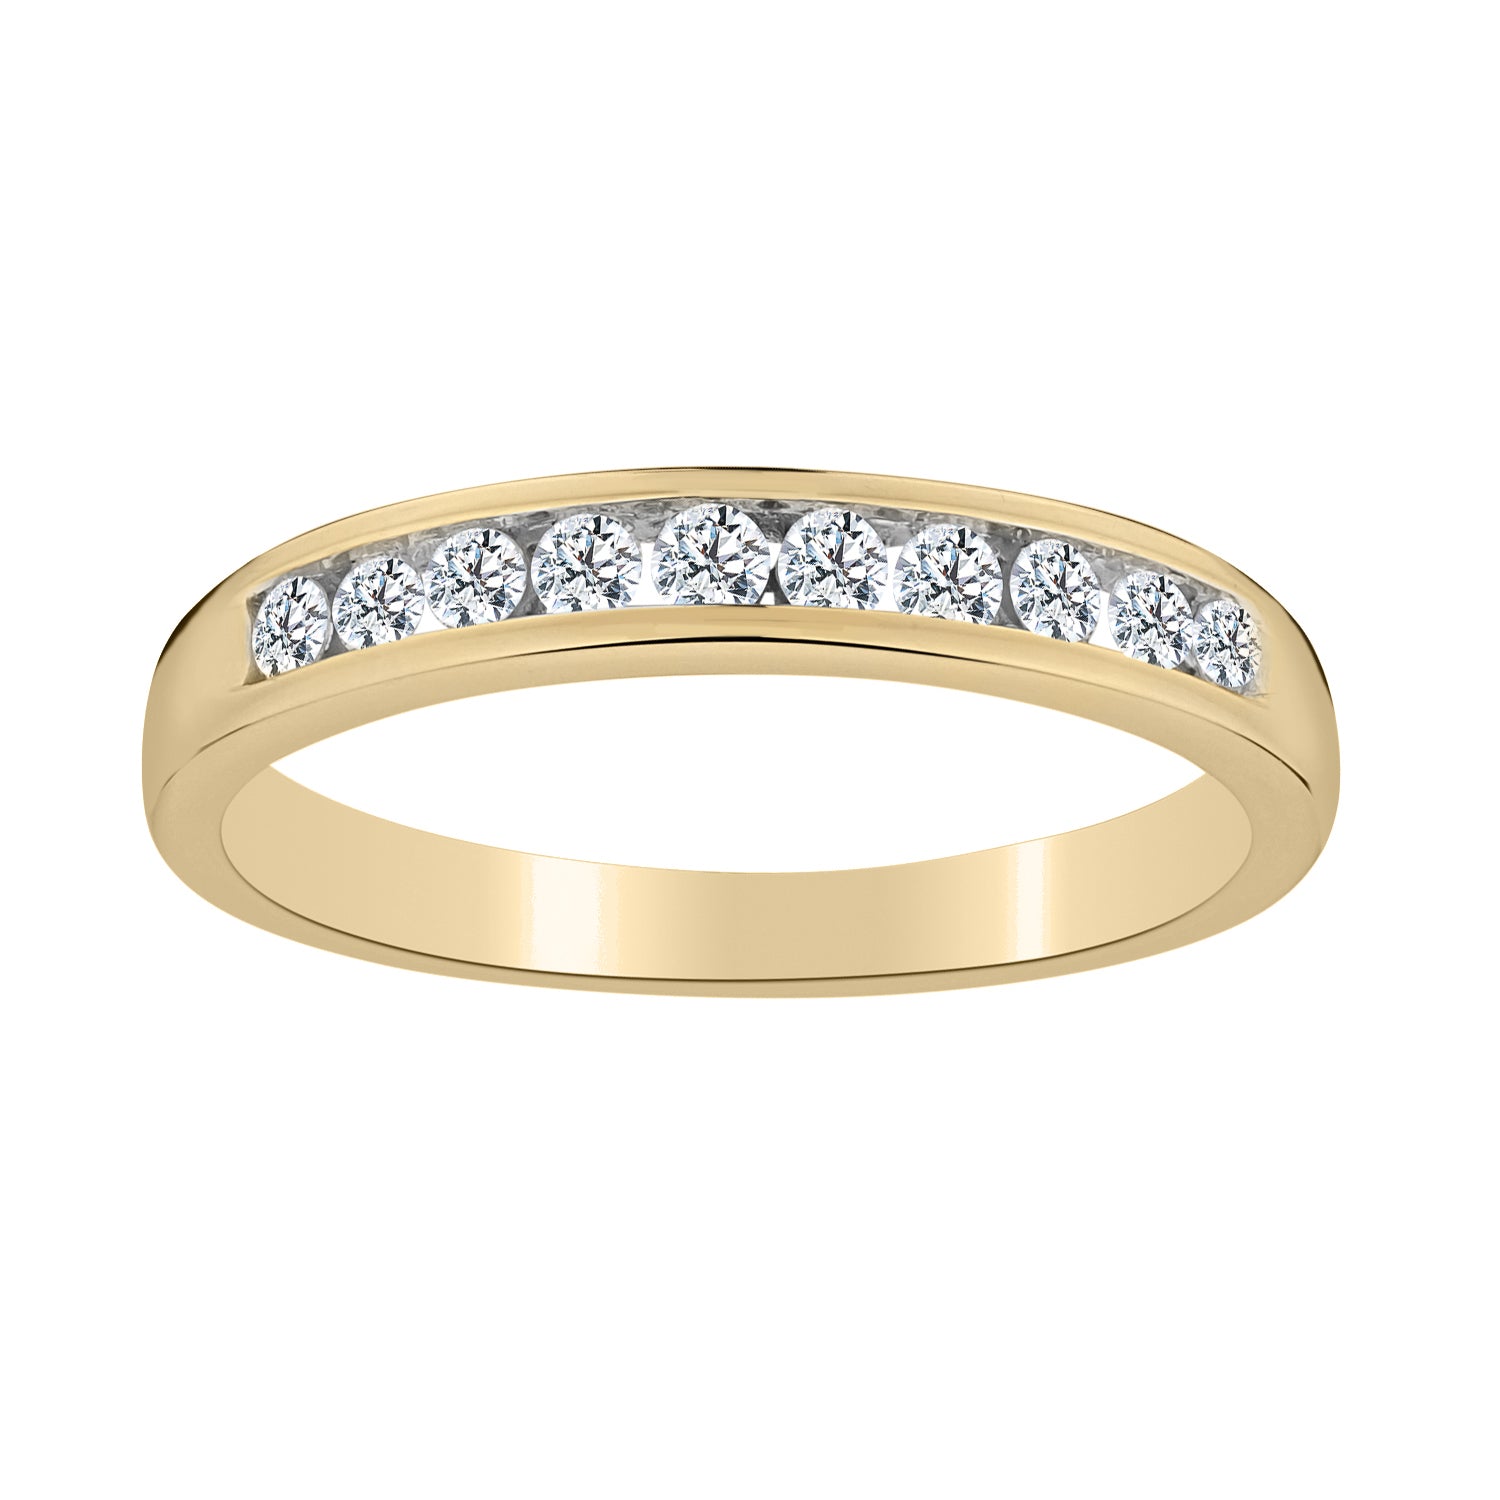 .25 Carat of Diamonds Ring Band, 10kt Yellow Gold…....................NOW